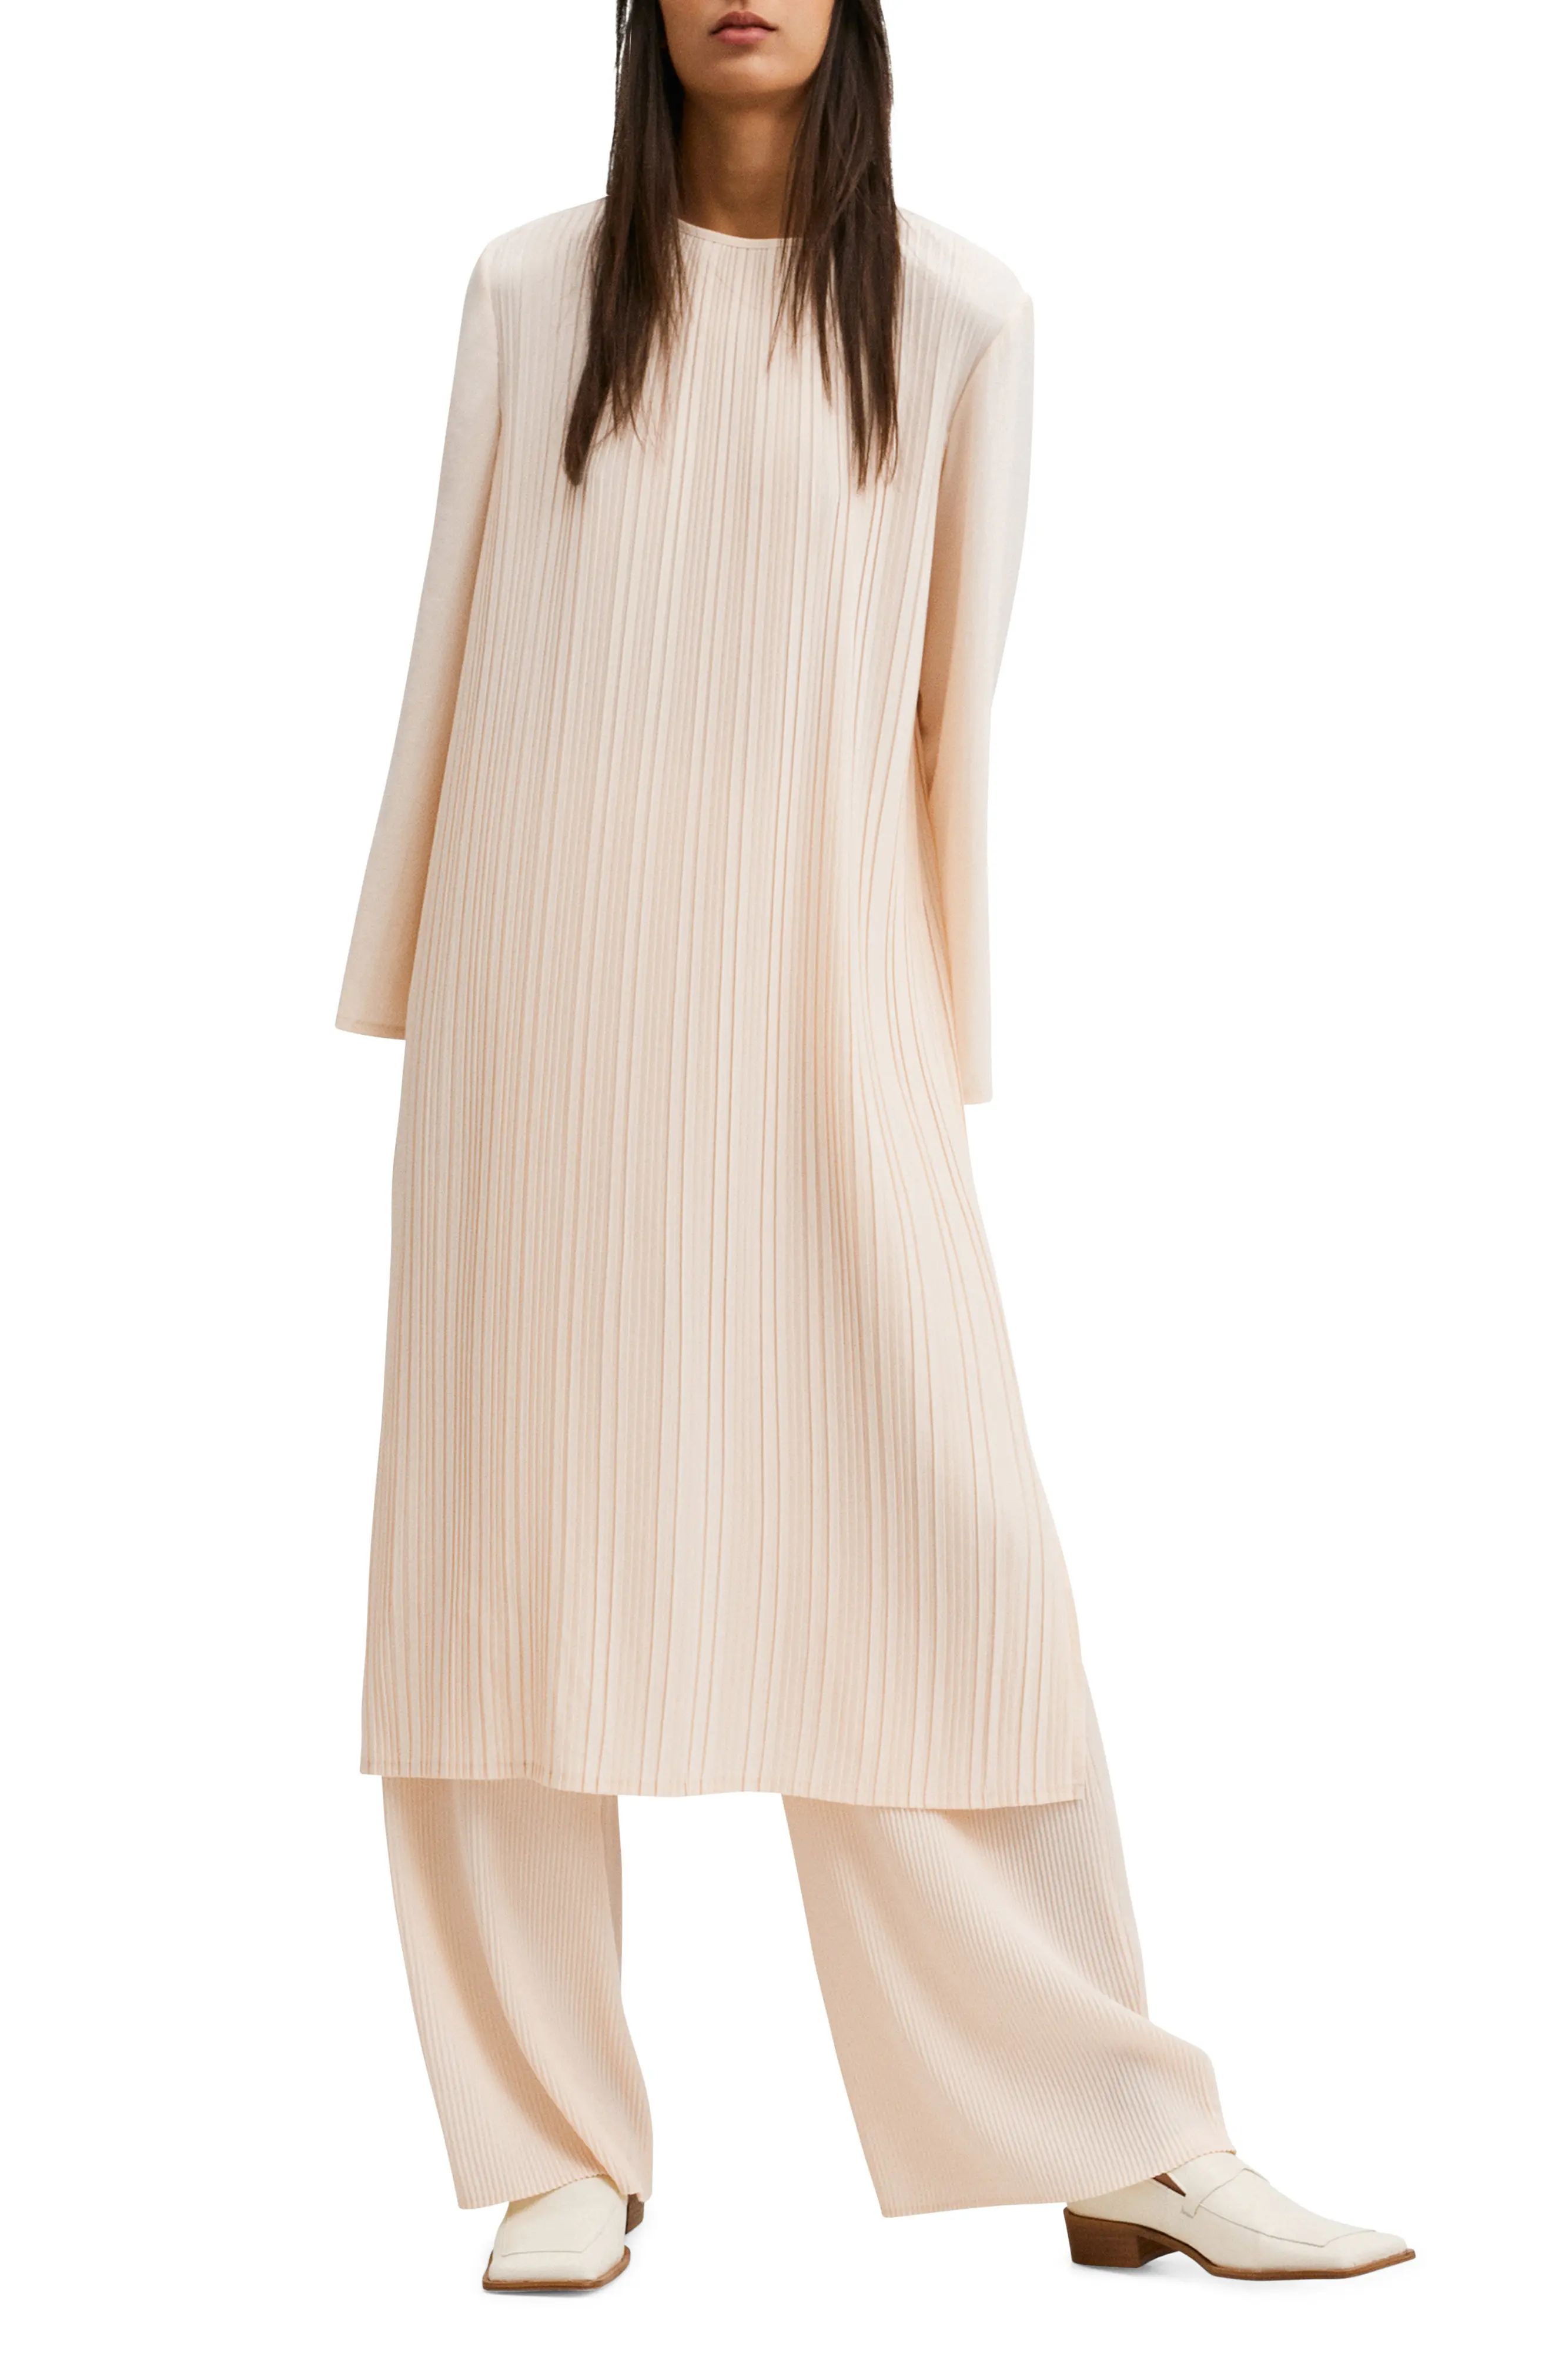 MANGO Oversize Pleated Long Sleeve Dress in Light Beige at Nordstrom, Size 10 | Nordstrom